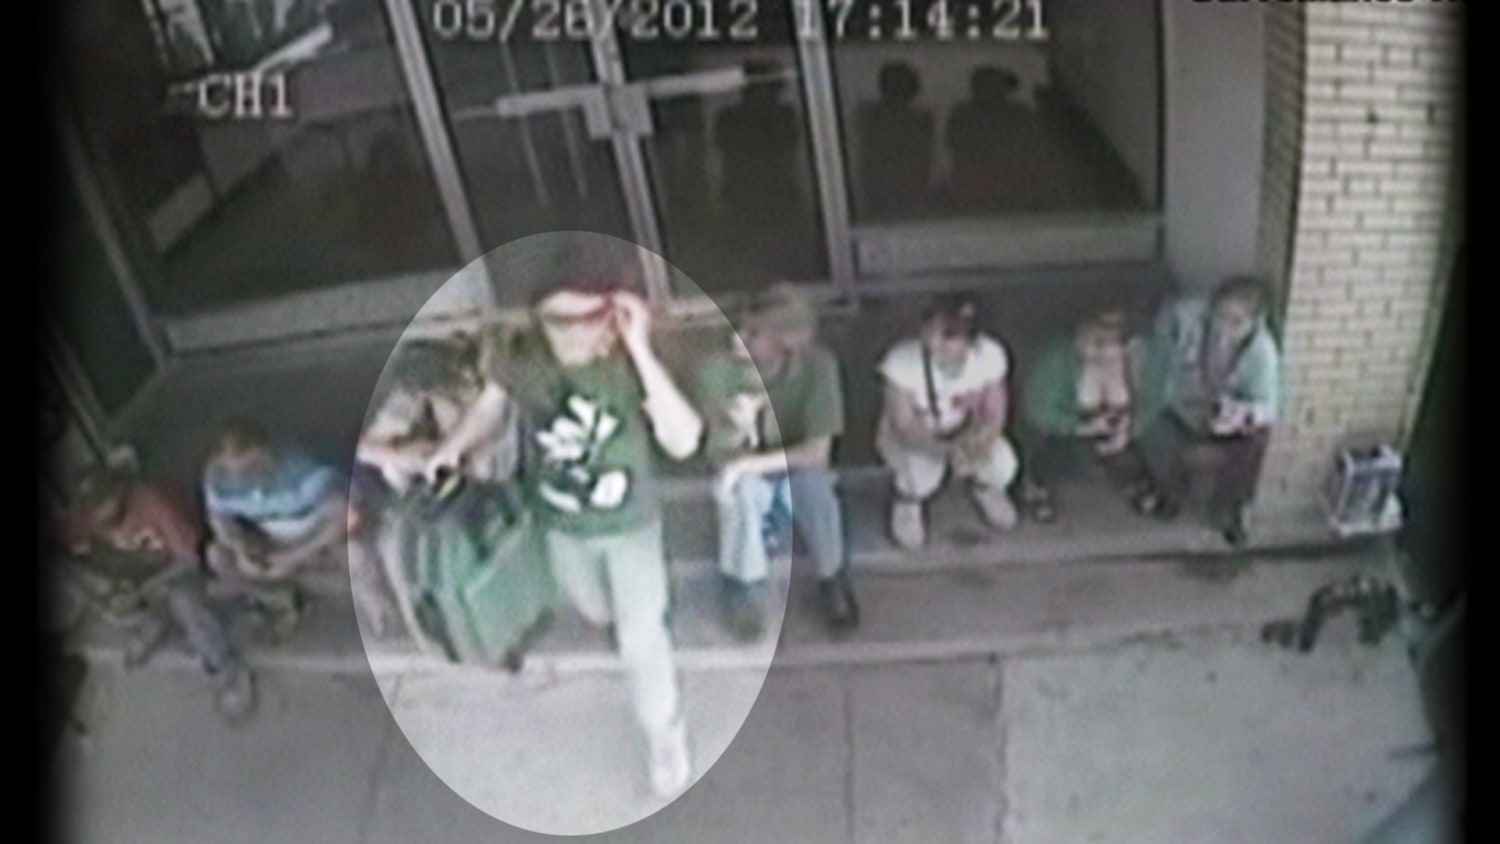 Surveillance Video Shown in Canadian Body Parts Trial